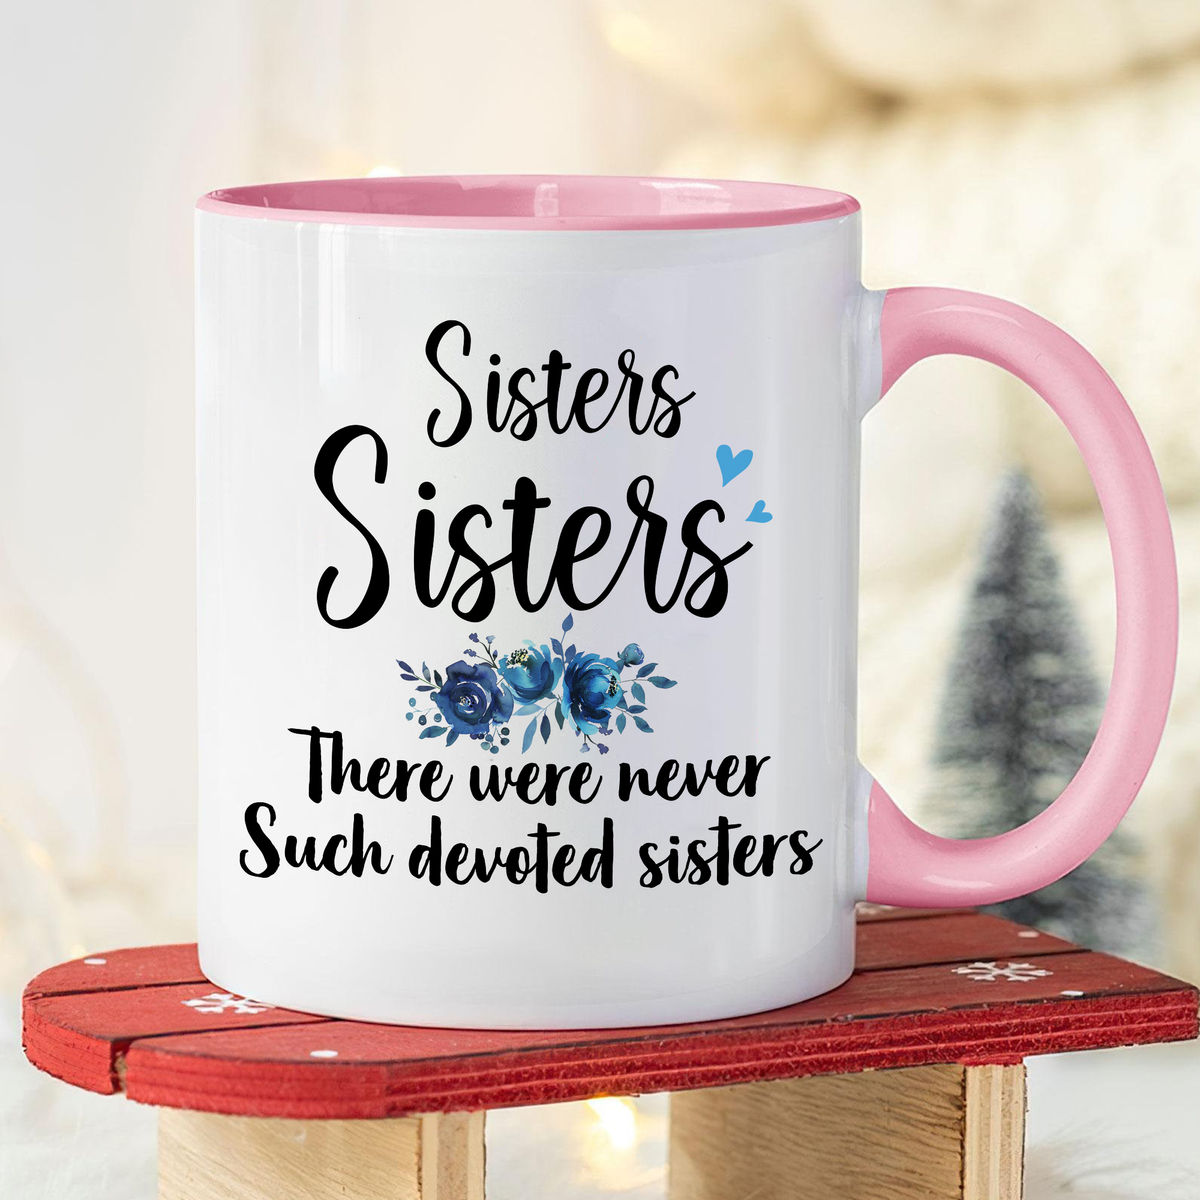 Personalized Mug For Sisters - Sisters Sisters - White Christmas - Up To 5 Woman, gift for her, gift for sisters (58095) - Personalized Mug_2